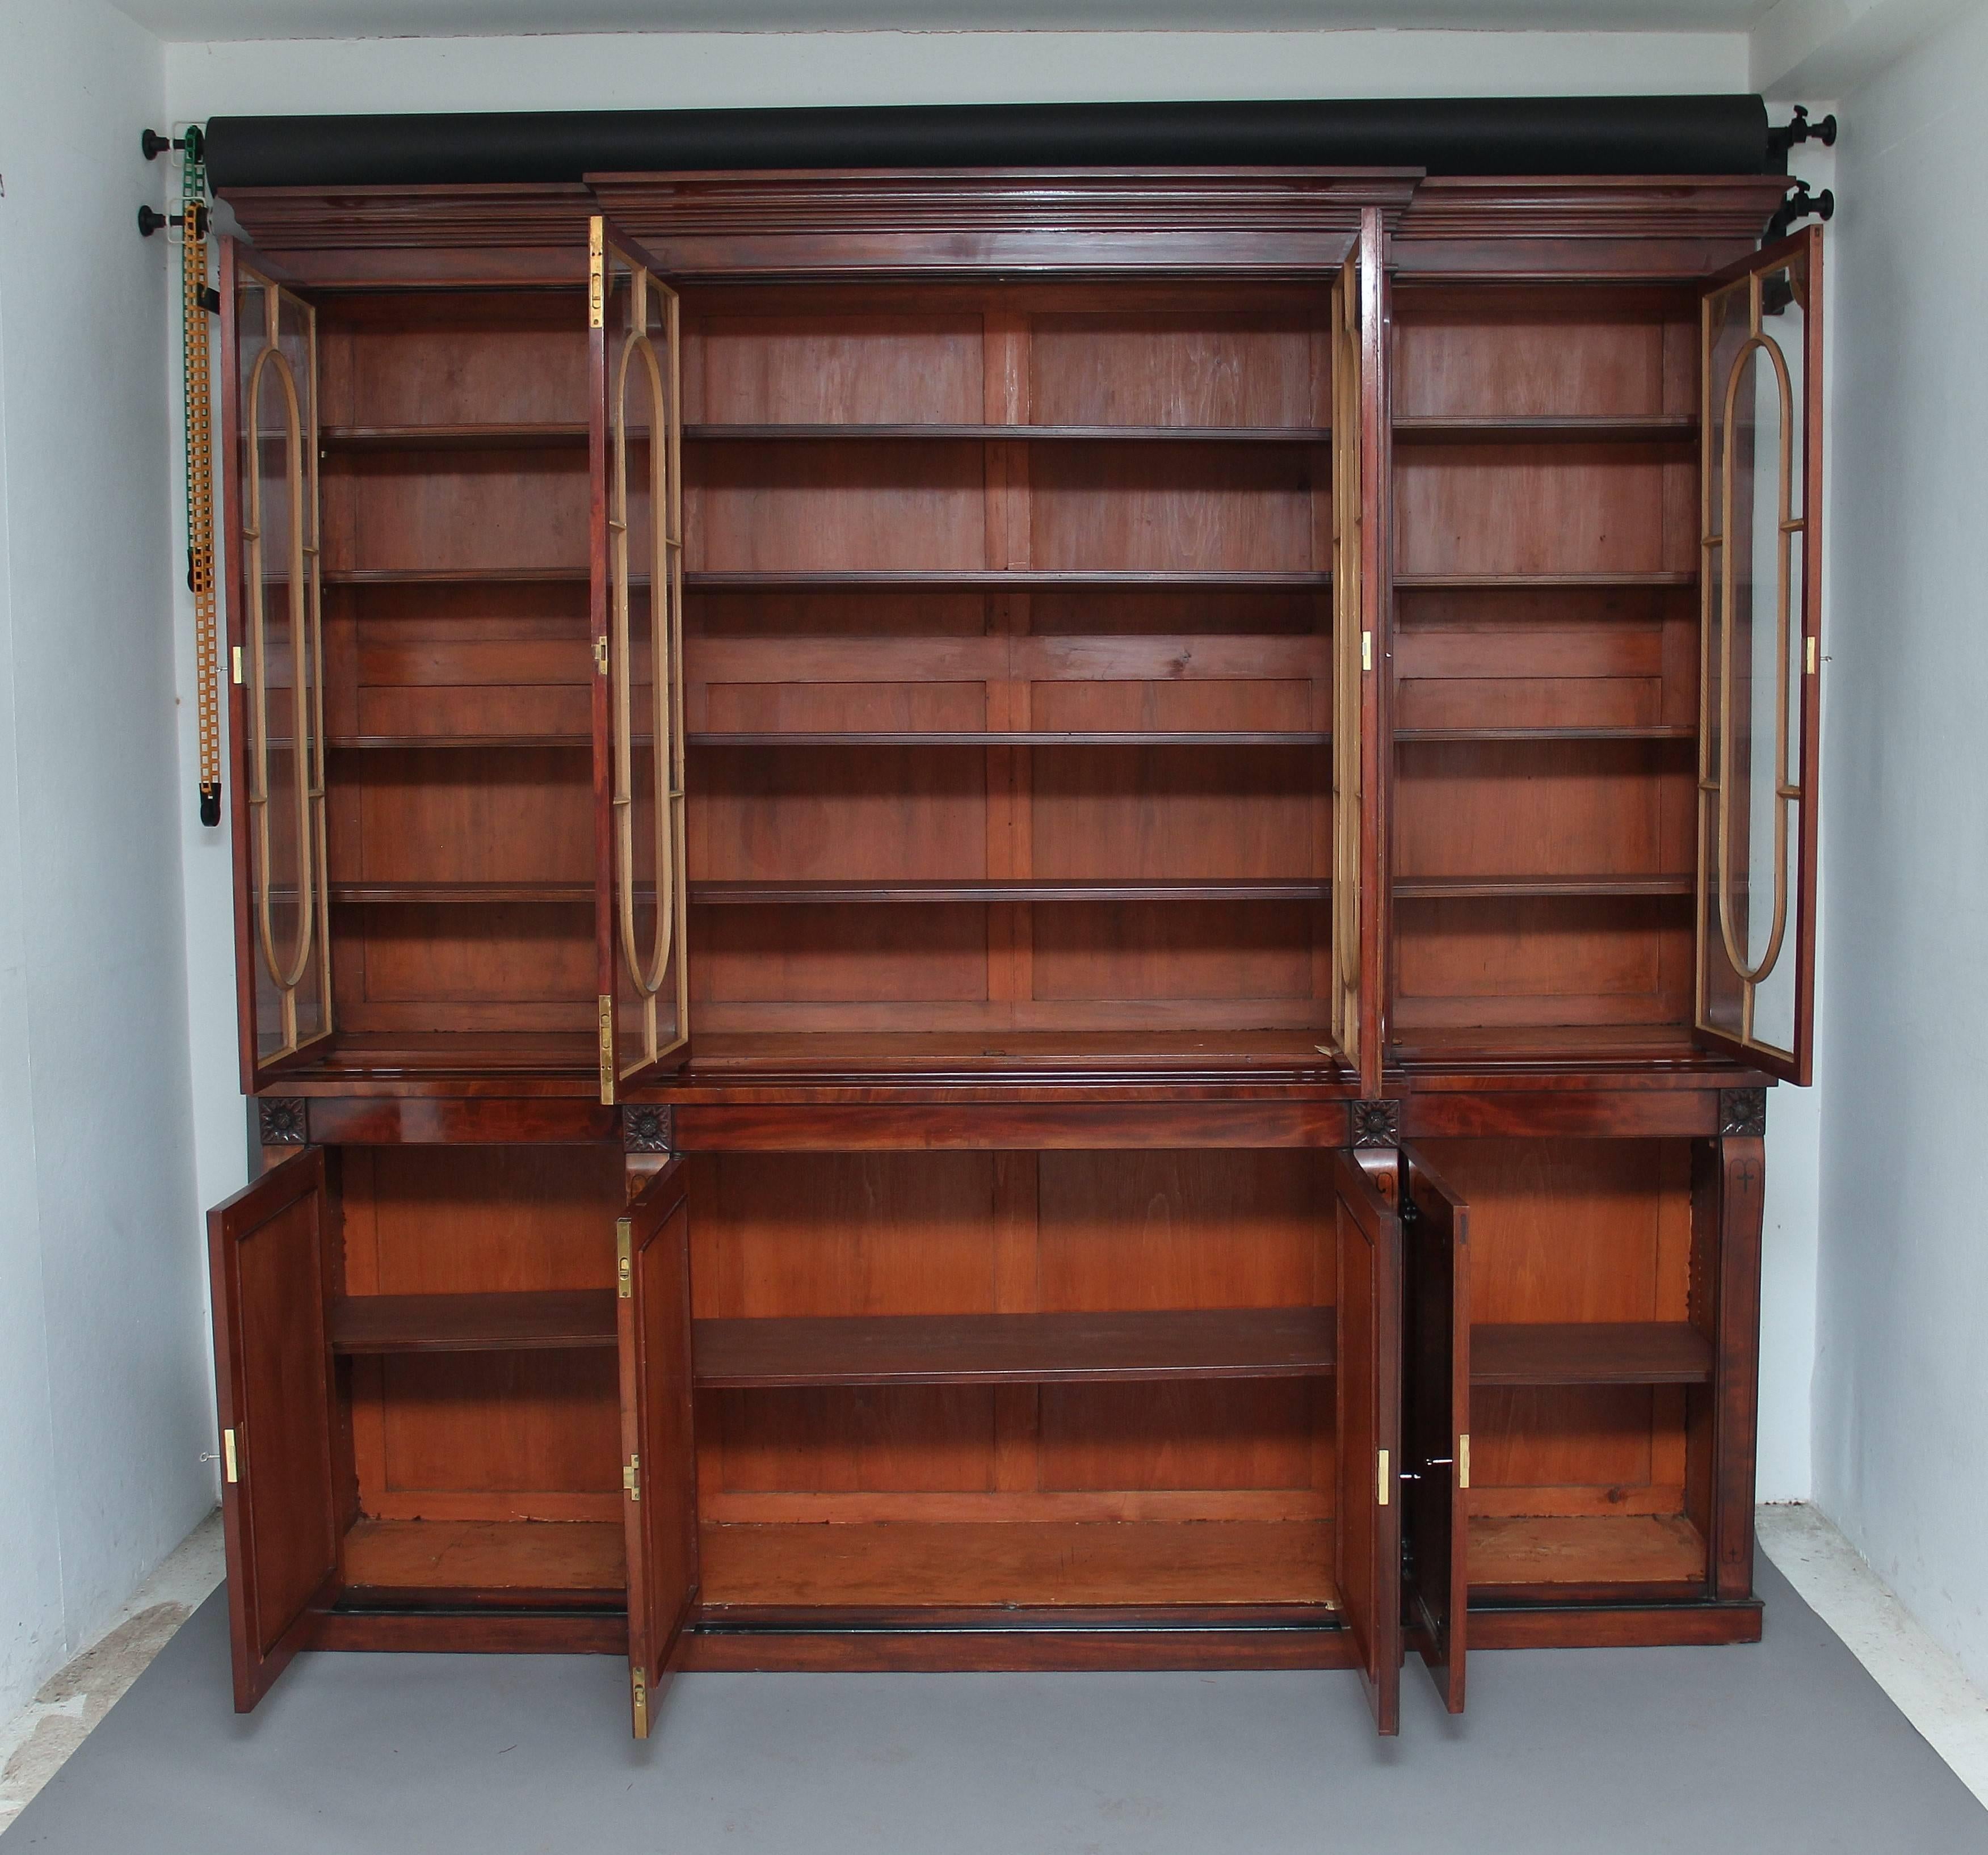 Early 19th century mahogany breakfront bookcase, the top having a stepped moulded cornice with four glazed doors below with nicely shaped astral bars, each door decorated with carved patraes in each corner, the doors opening to reveal four